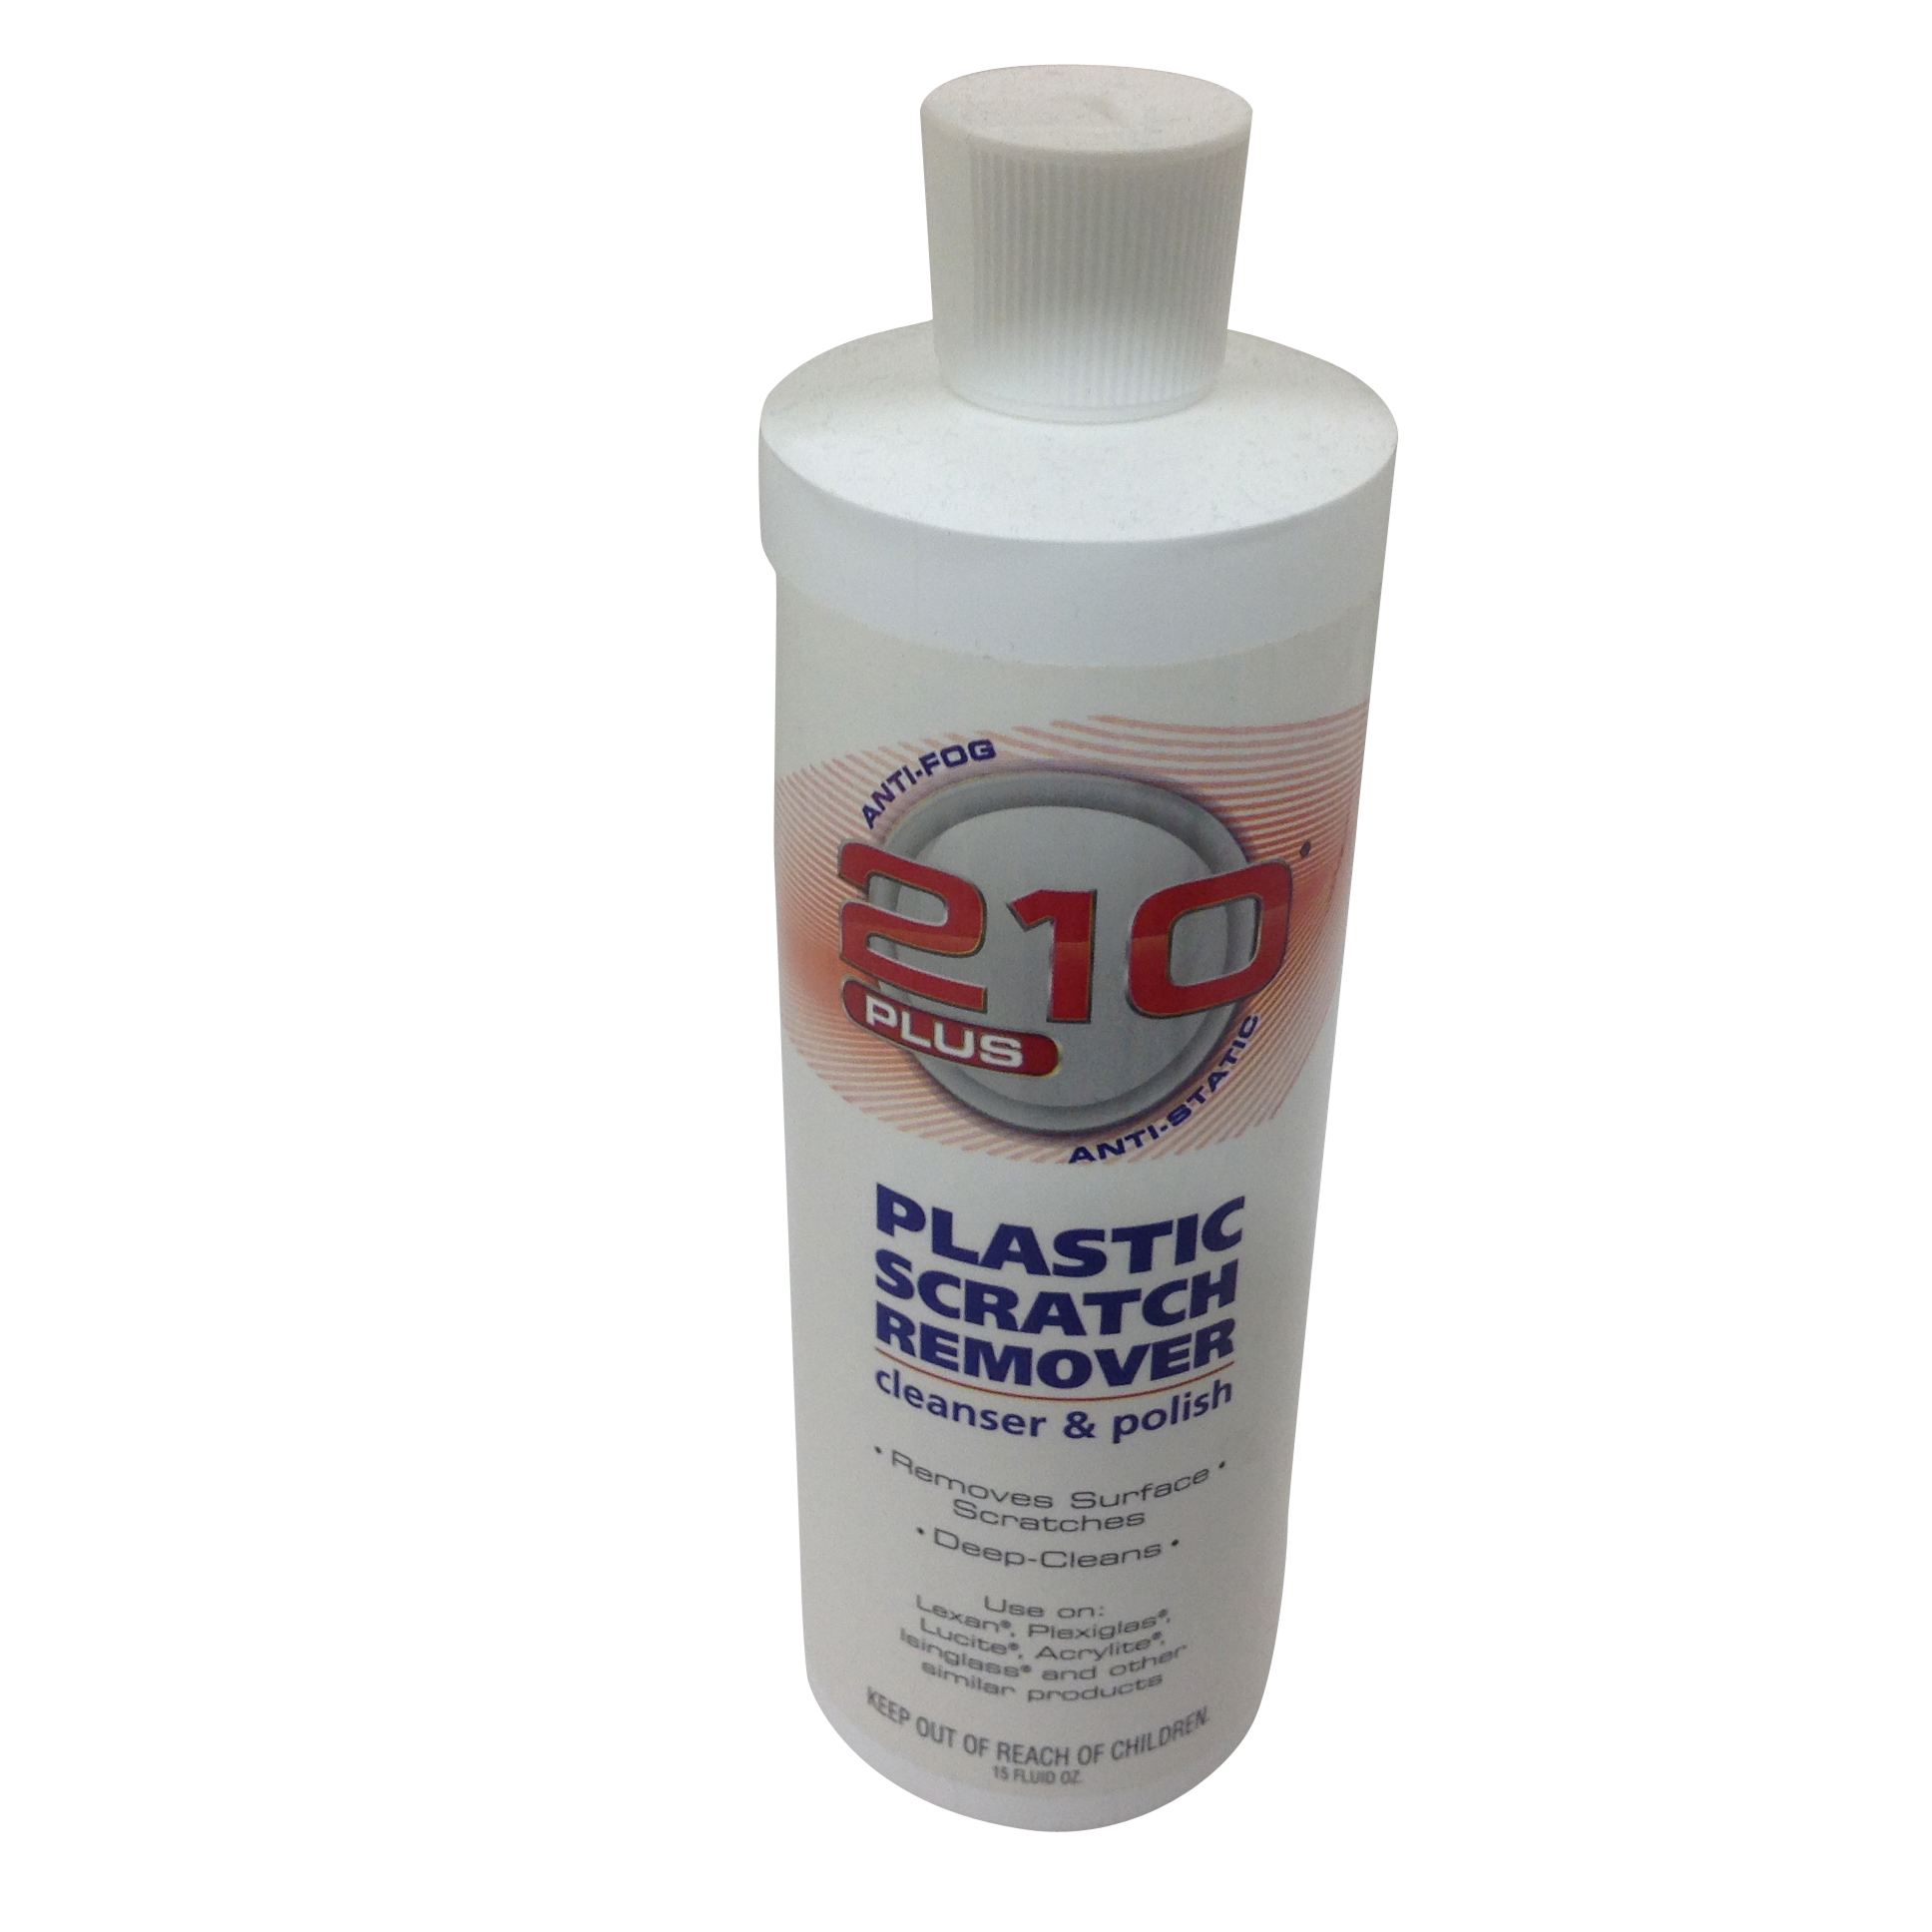 210 Plastic Scratch Remover for Eisenglass